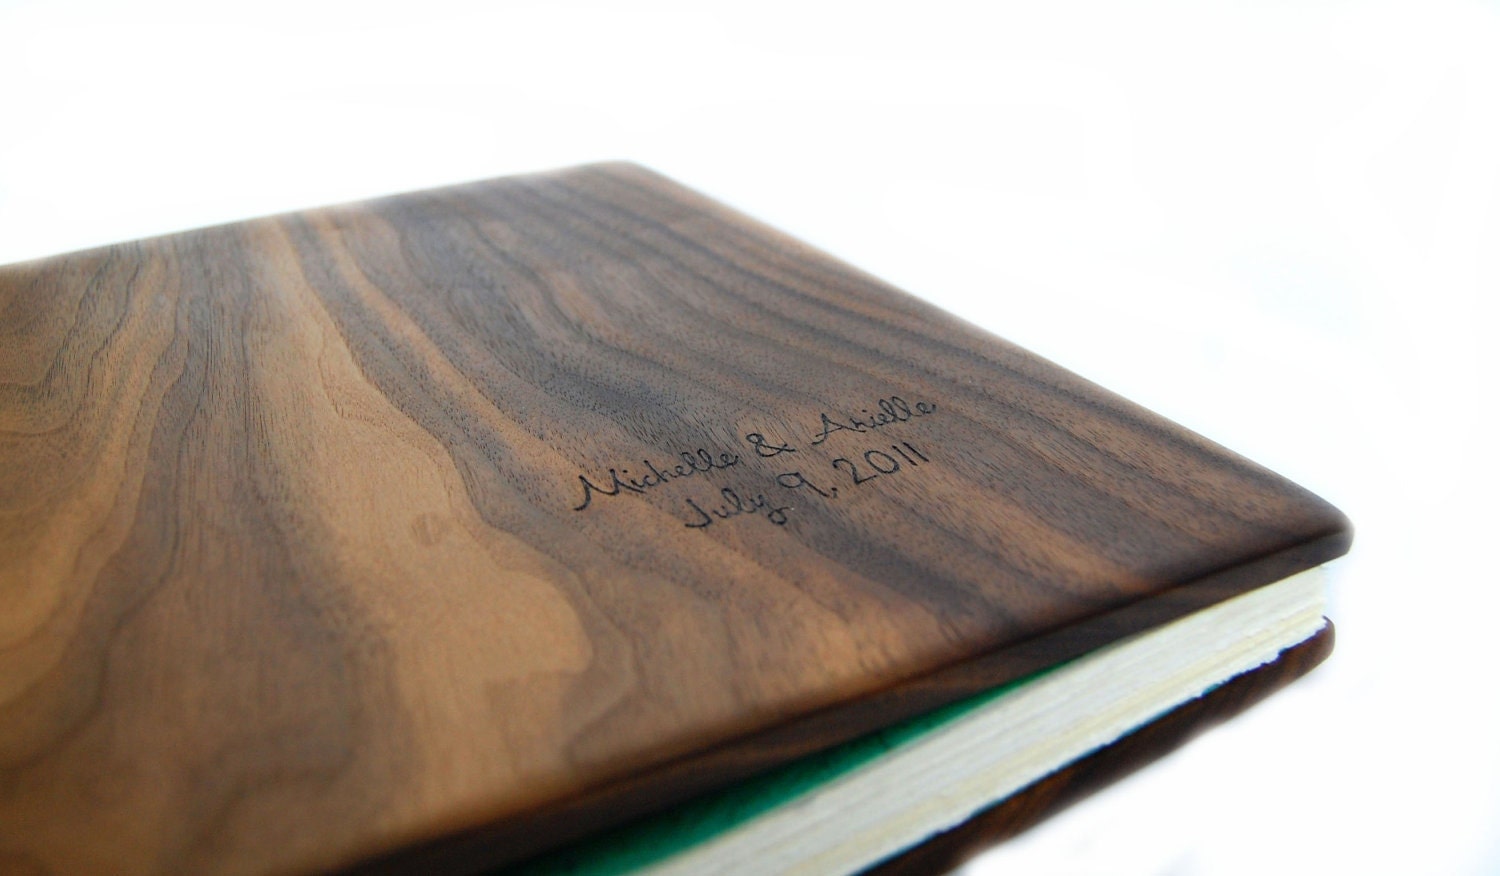 custom photo album scrapbook unique wood book  Black Walnut teal - anniversary gift -  large personalized - made to order - ThreeTreesBindery